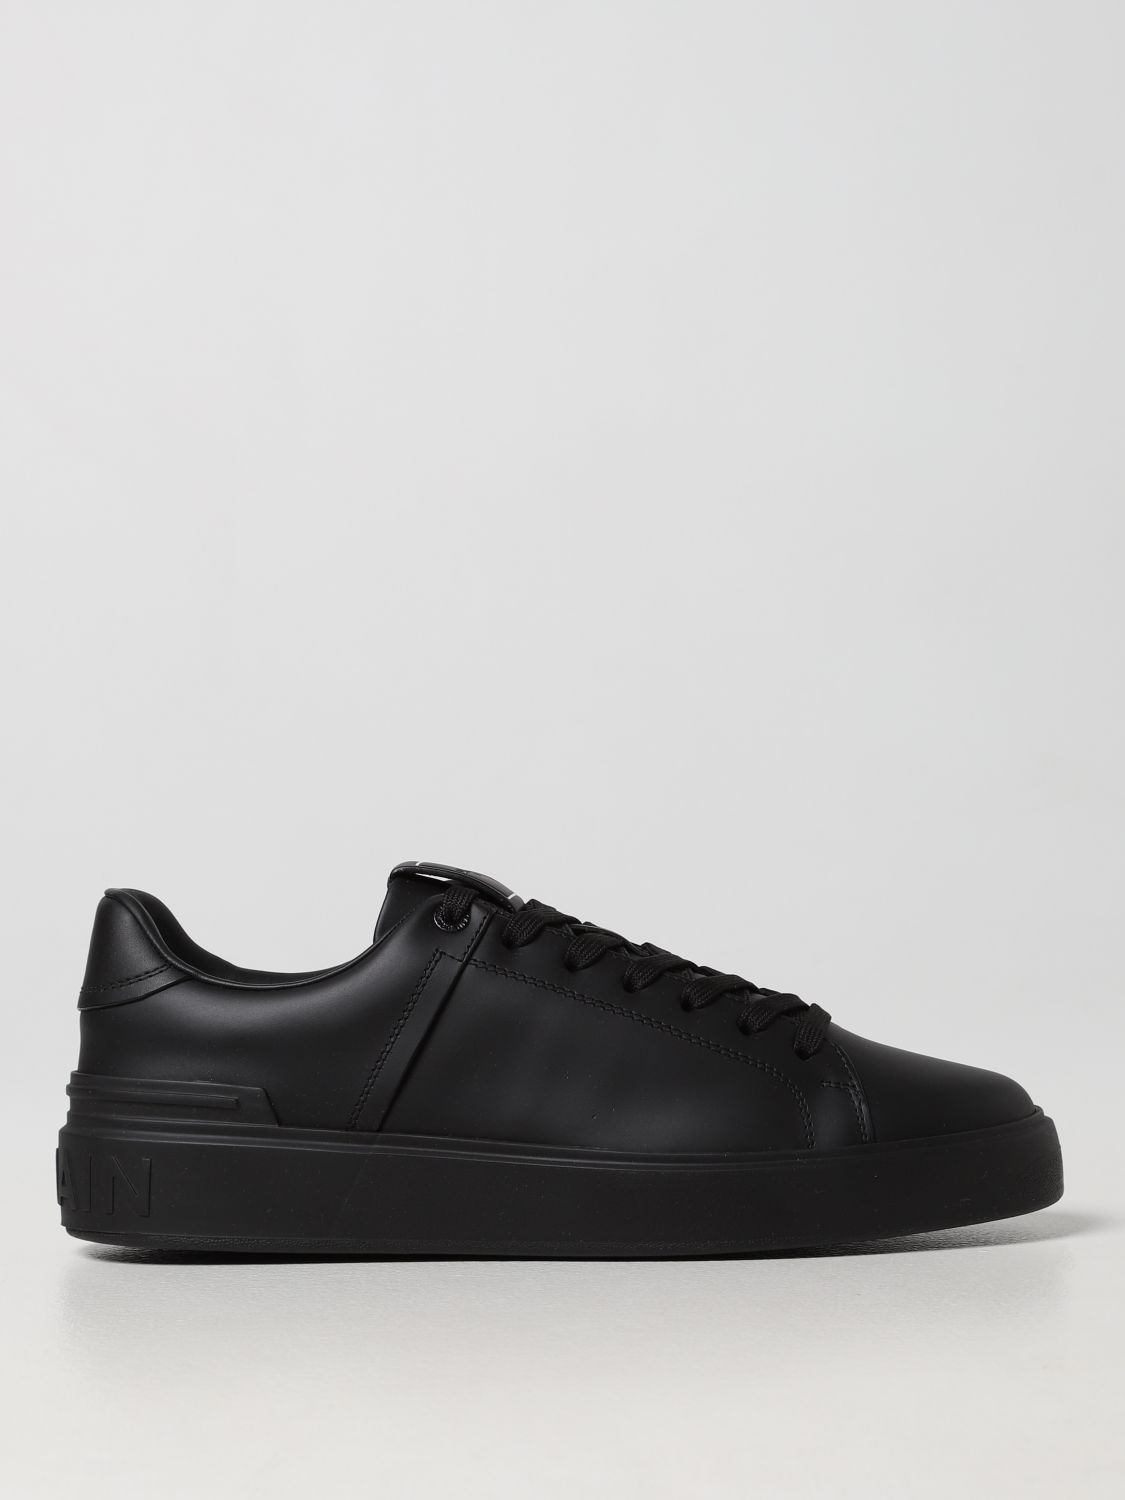 sneakers for man - Black | Balmain sneakers online on GIGLIO.COM